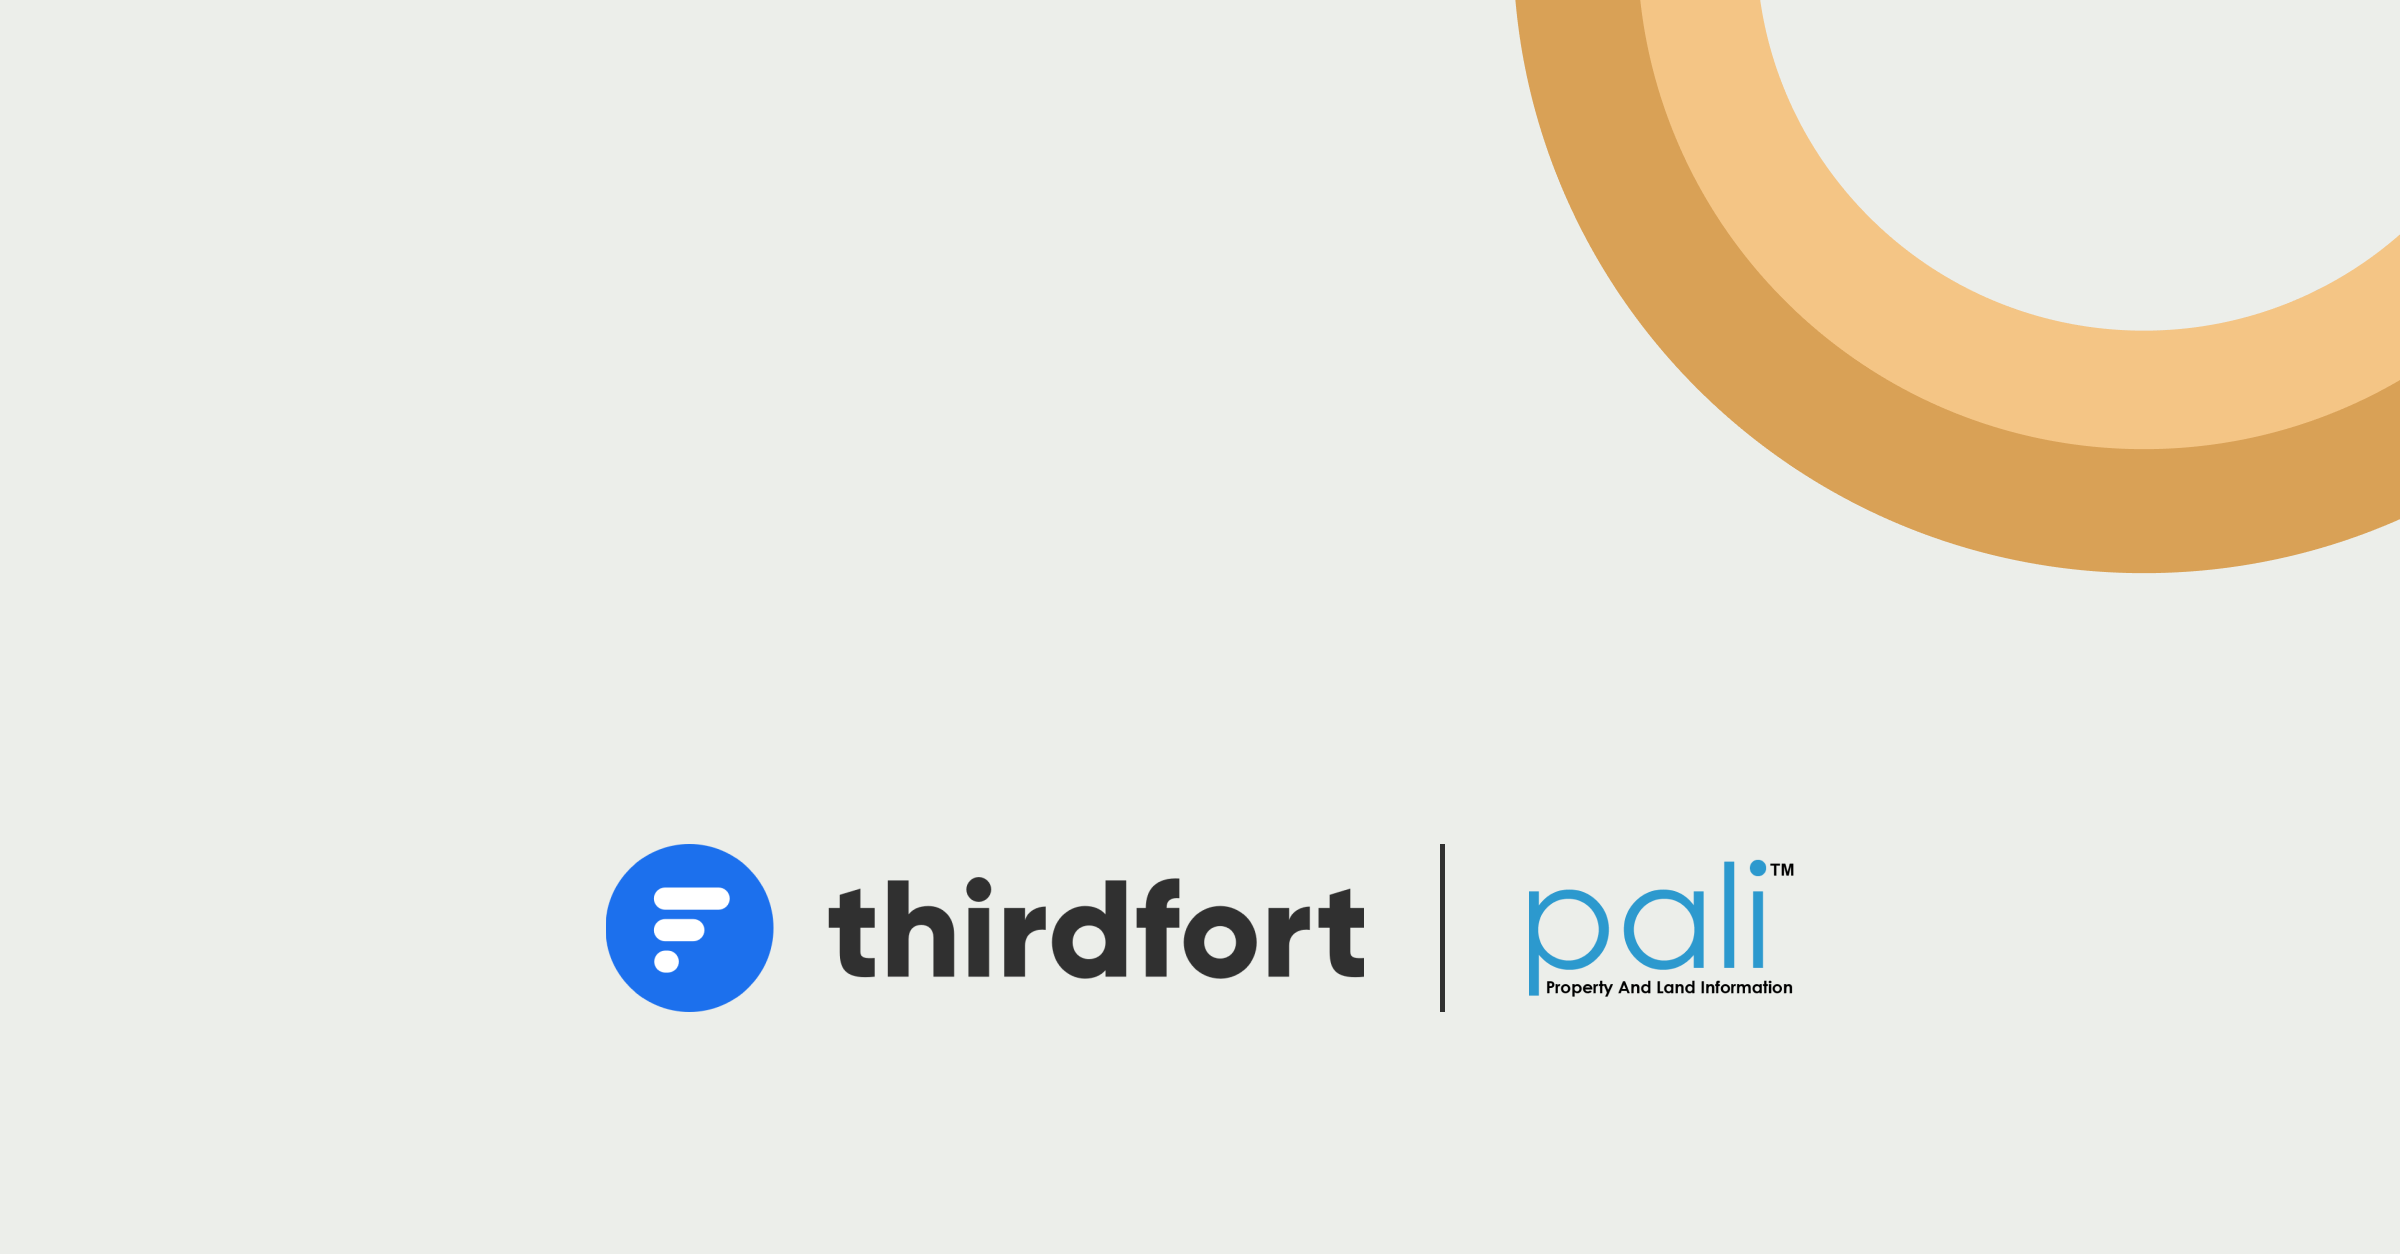 The Thirdfort and Pali logos on a grey background with a yellow circular graphic in the top right corner